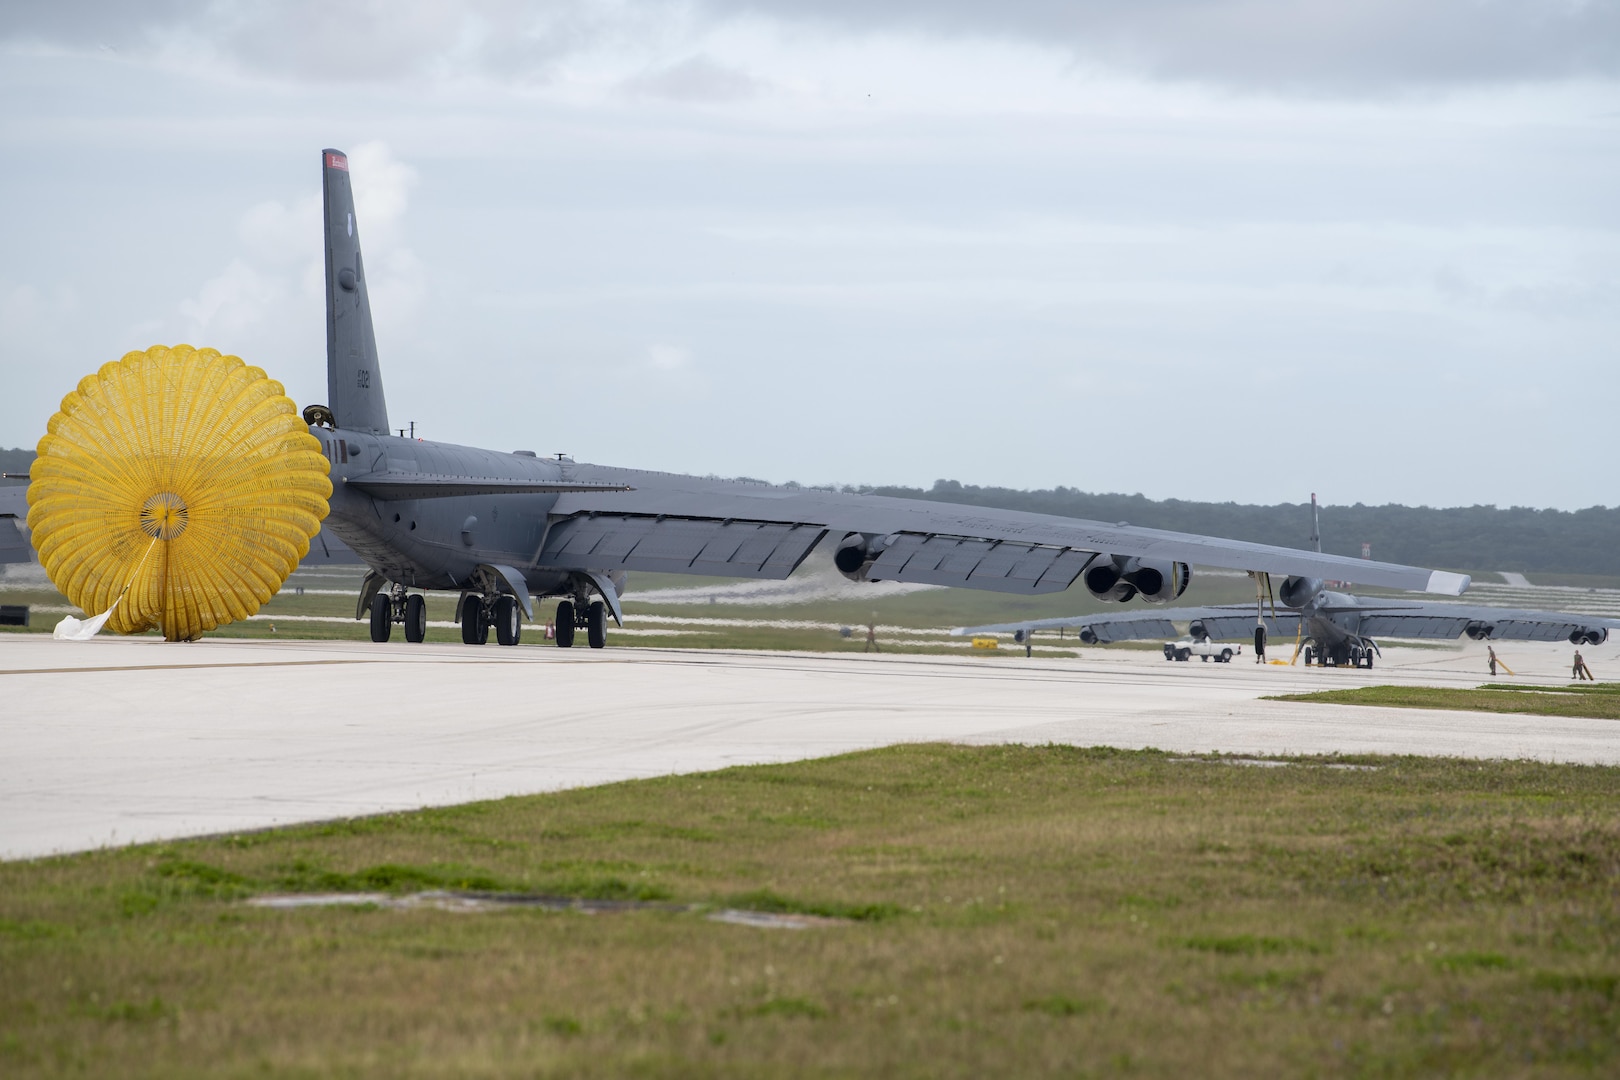 A U.S. Air Force B-52 Stratofortress from the 96th Expeditionary Bomb Squadron arrives for a Bomber Task Force deployment at Andersen Air Force Base, Guam, Feb. 11, 2022. Bomber missions contribute to joint force lethality and deter aggression in the Indo-Pacific by demonstrating U.S. Air Force ability to operate anywhere in the world at any time in support of the National Defense Strategy.  (U.S. Air Force photo by Staff Sgt. Lawrence Sena)